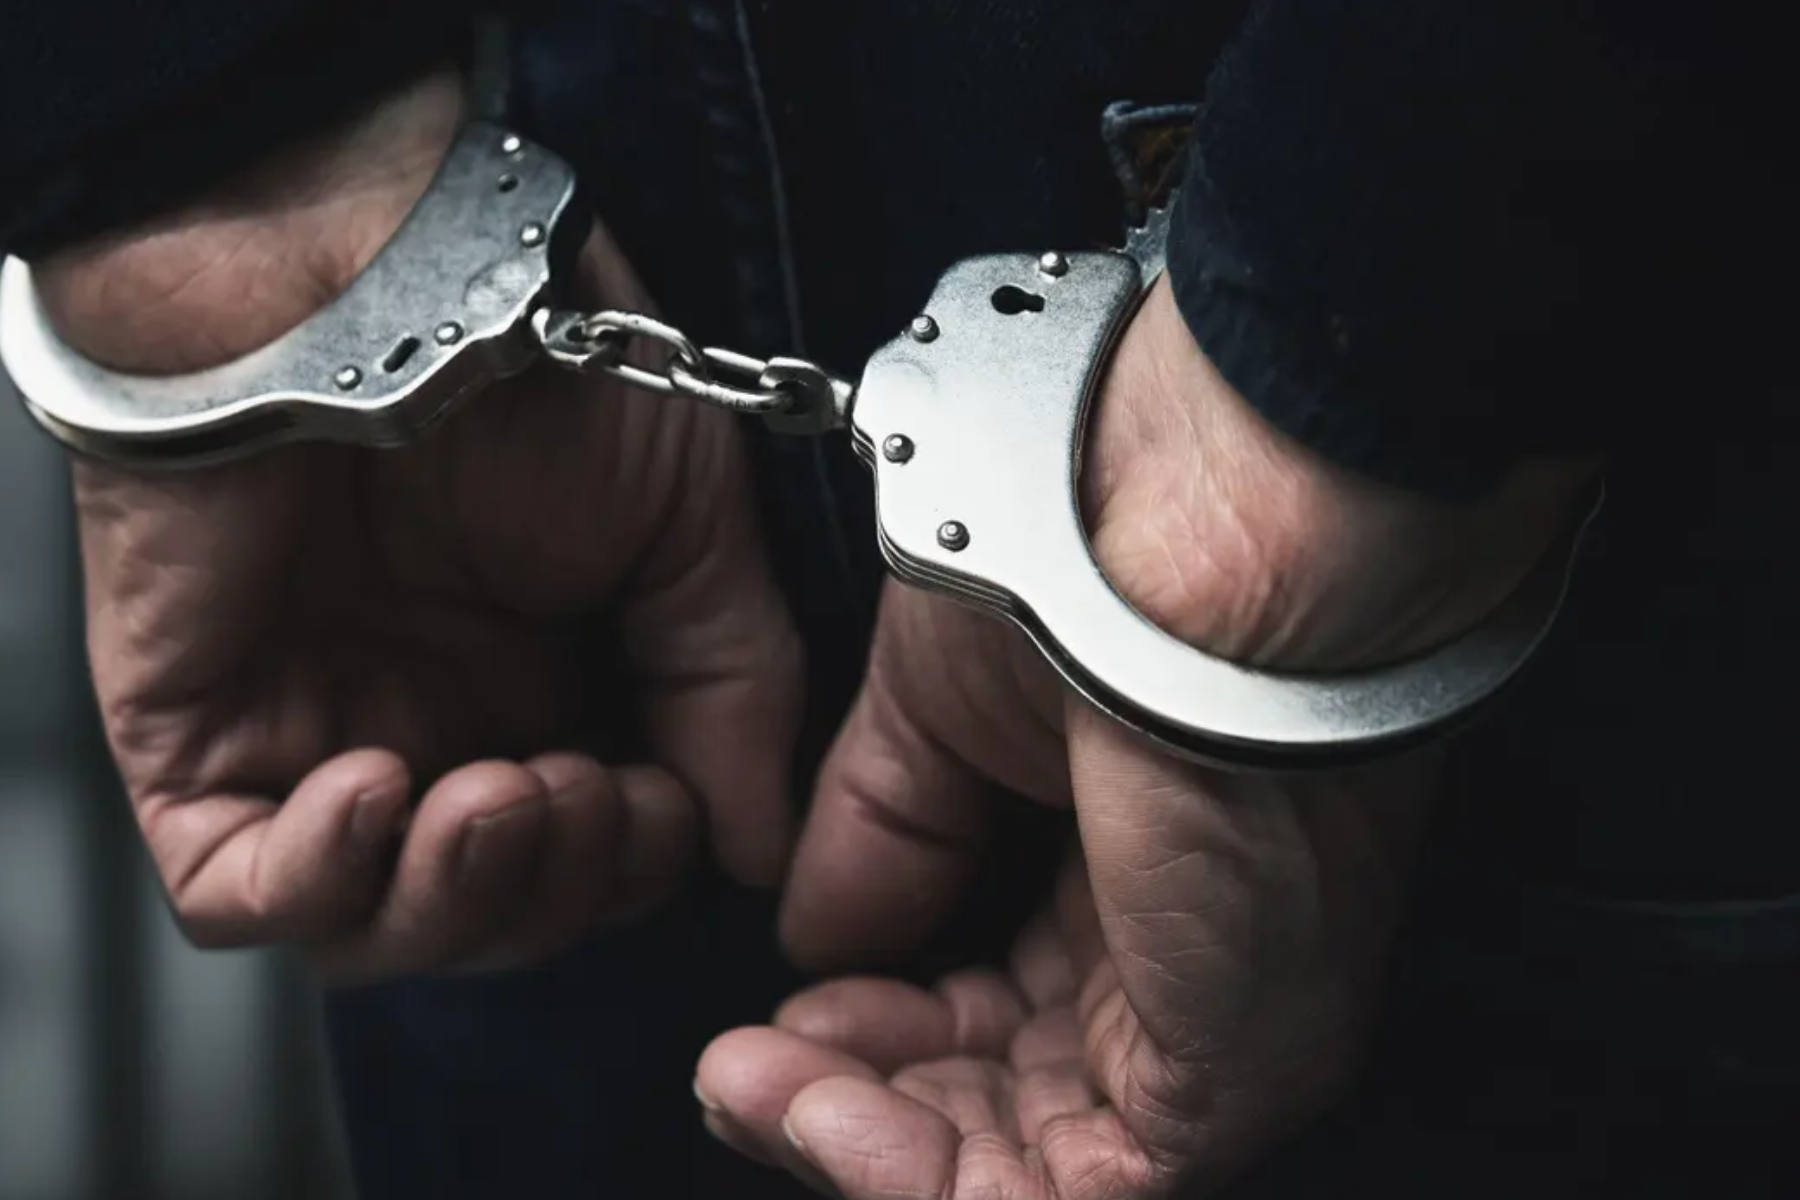 A close-up photograph of a man's hands, which are handcuffed together